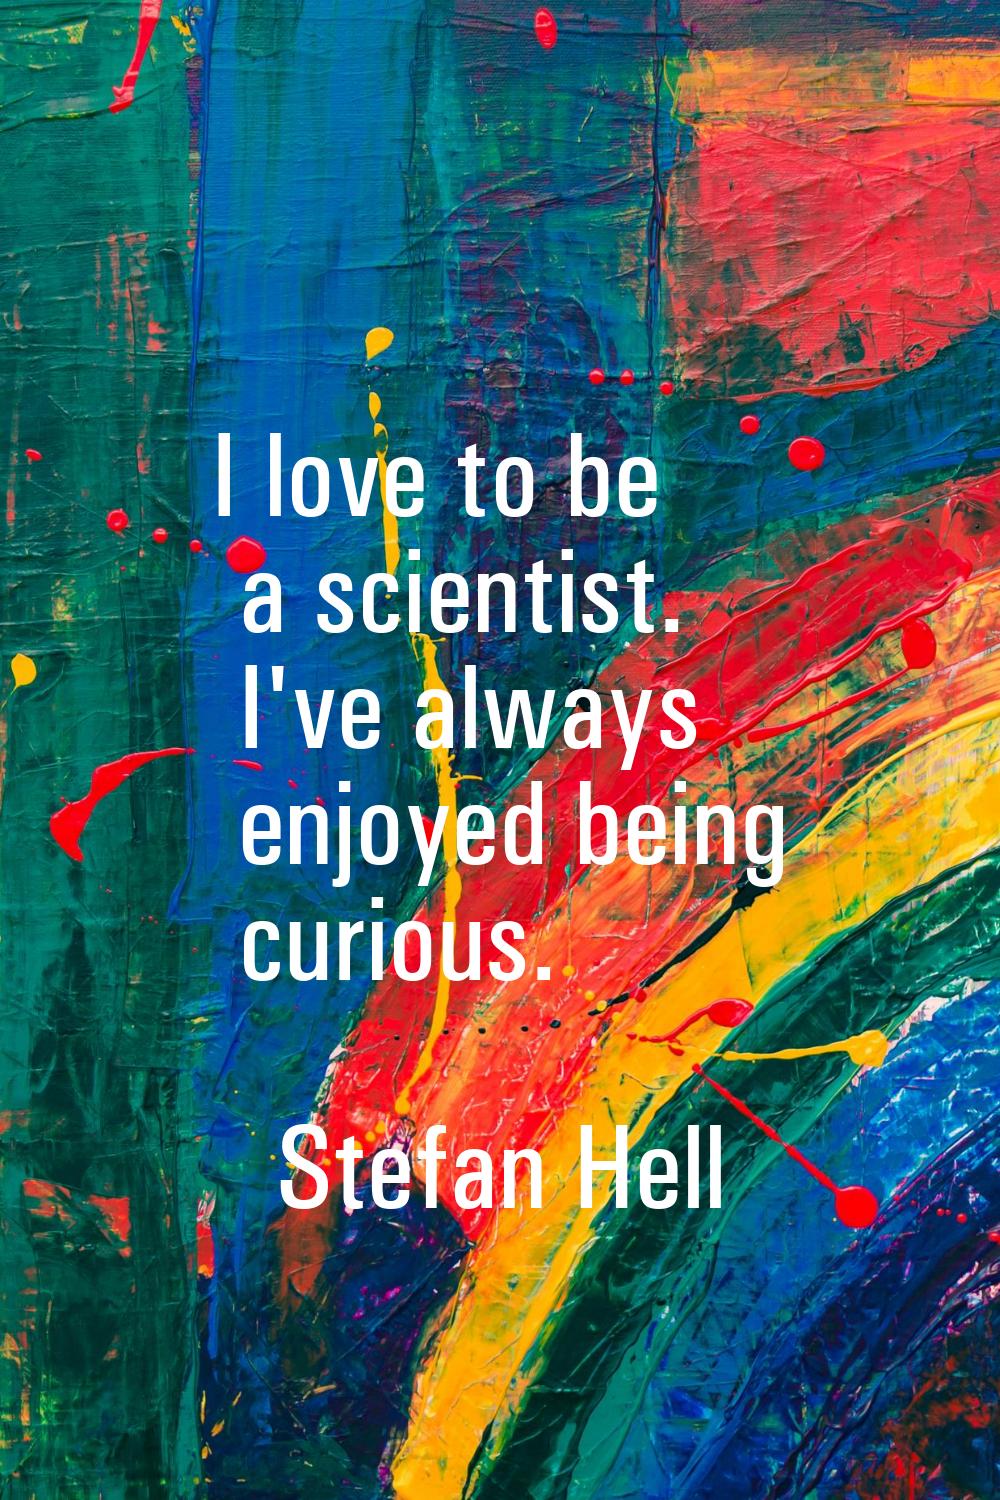 I love to be a scientist. I've always enjoyed being curious.